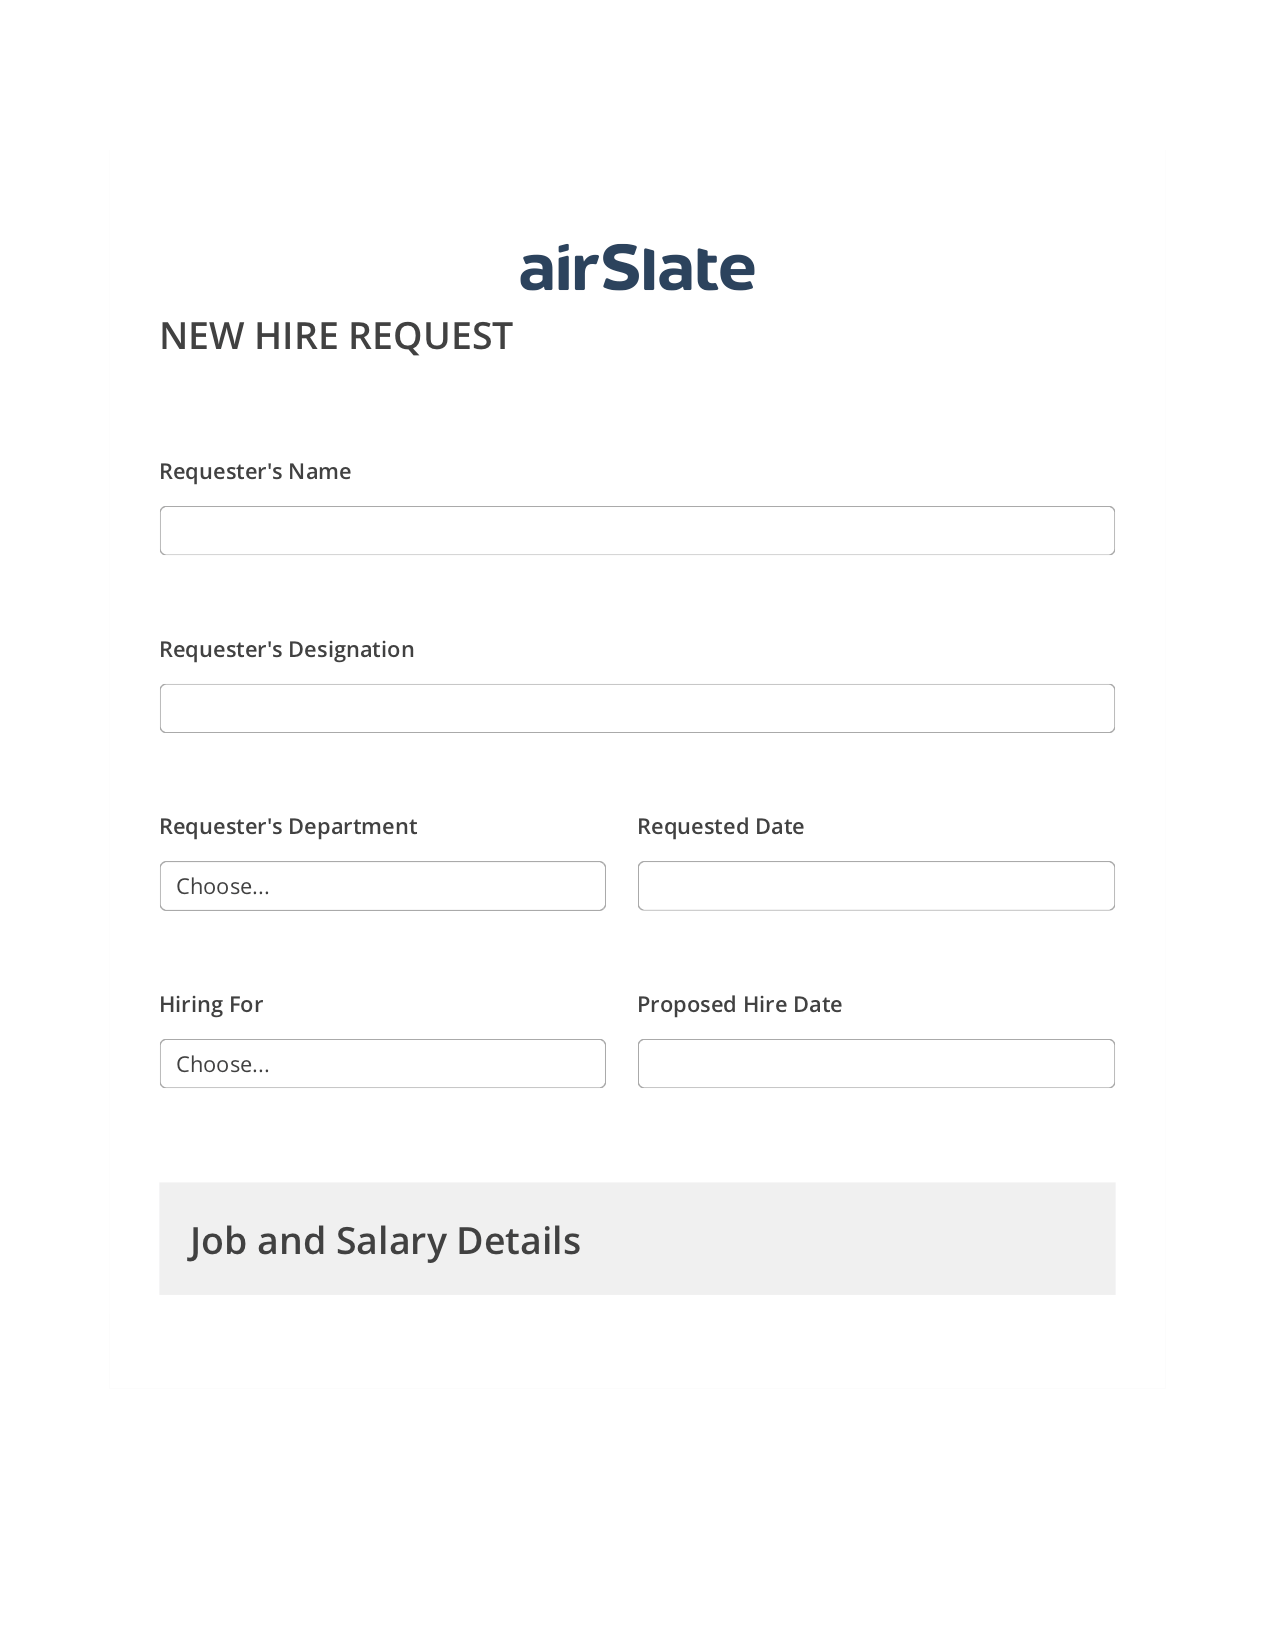 Hiring Request Workflow Pre-fill Dropdowns from Excel Bot, Remove Tags From Slate Bot, Archive to Box Bot